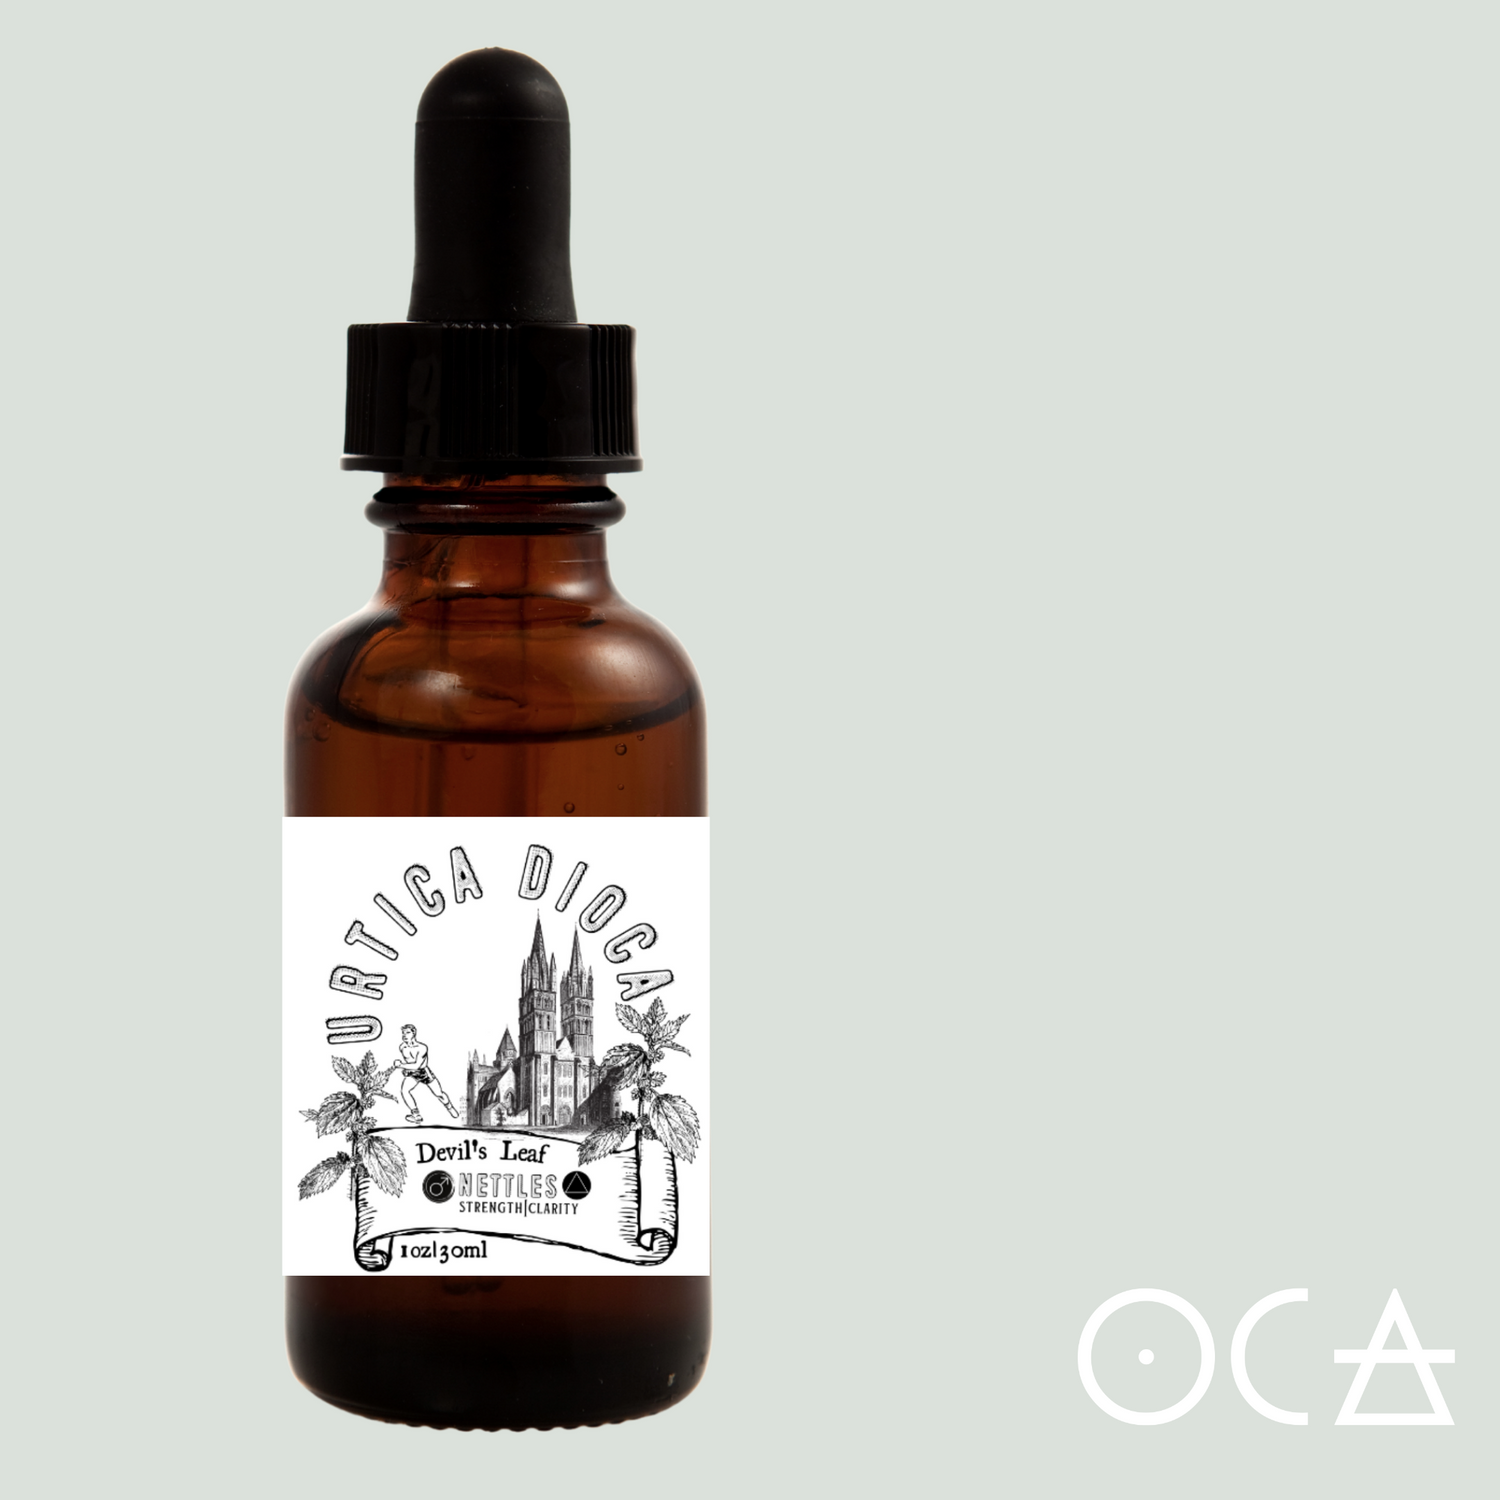 Nettles Herbal Tincture - Original City Apothecary